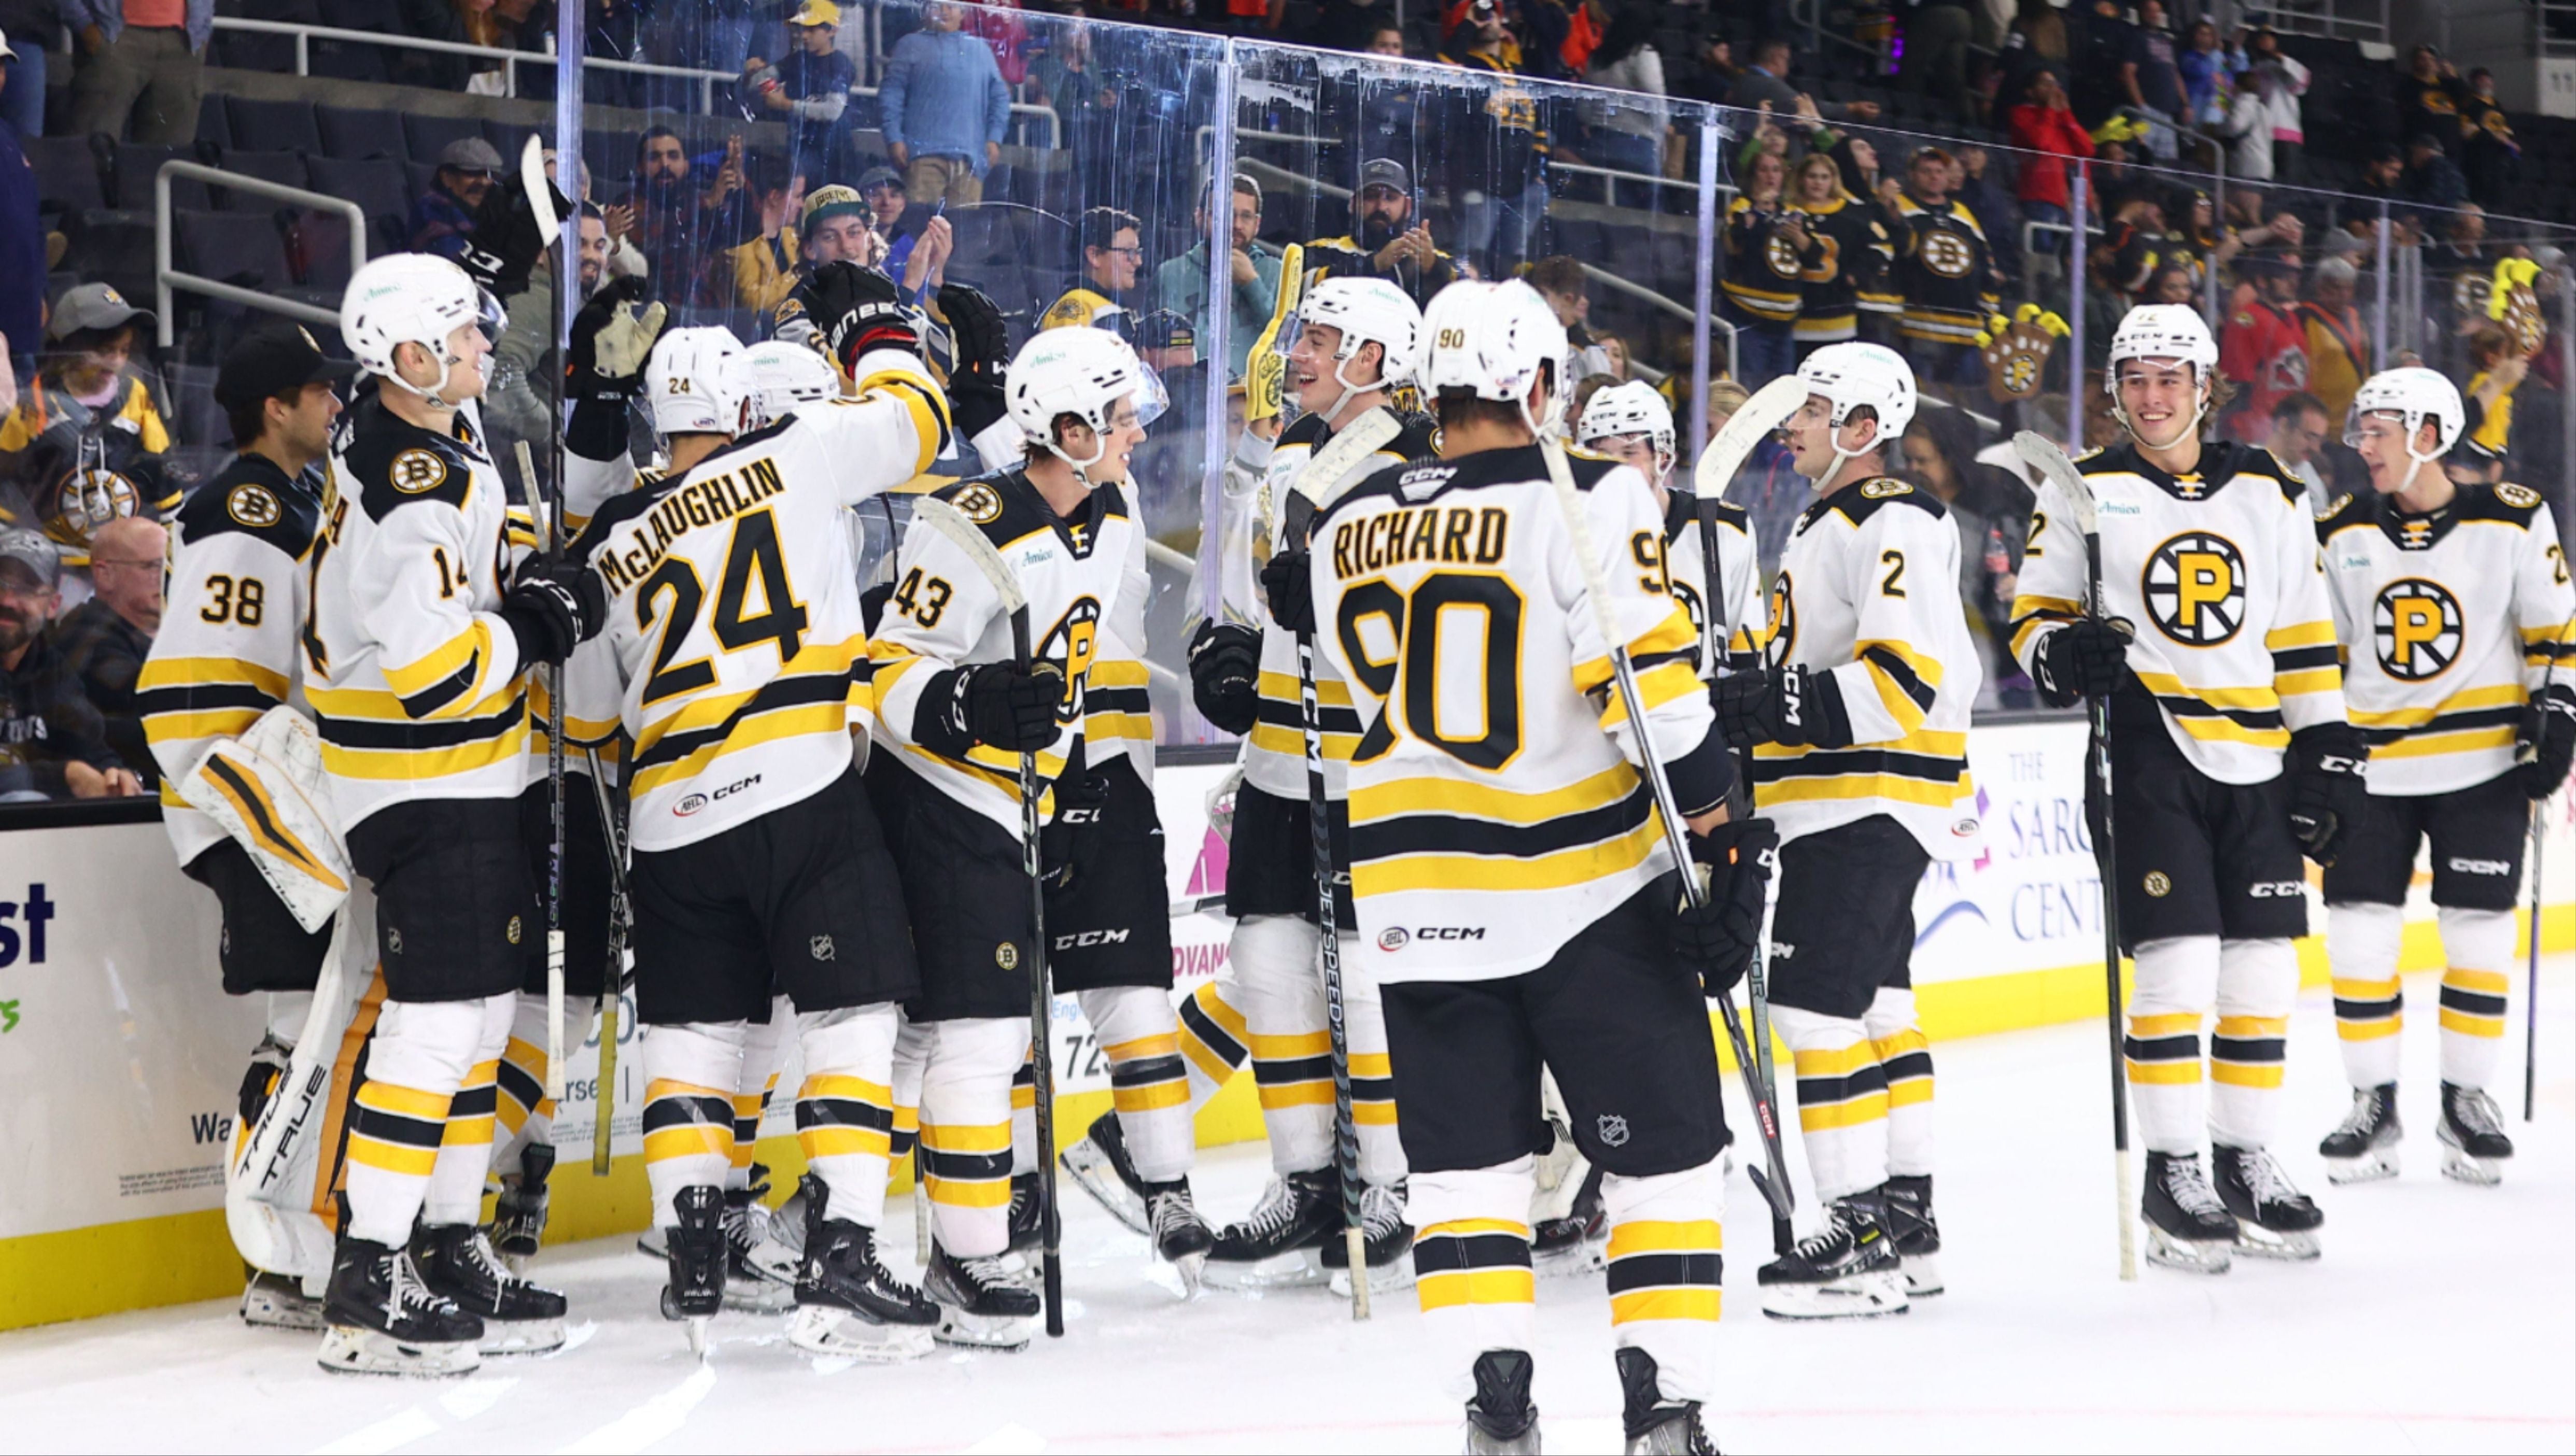 Bruins Announce Opening Night Roster For 2023-24 Season